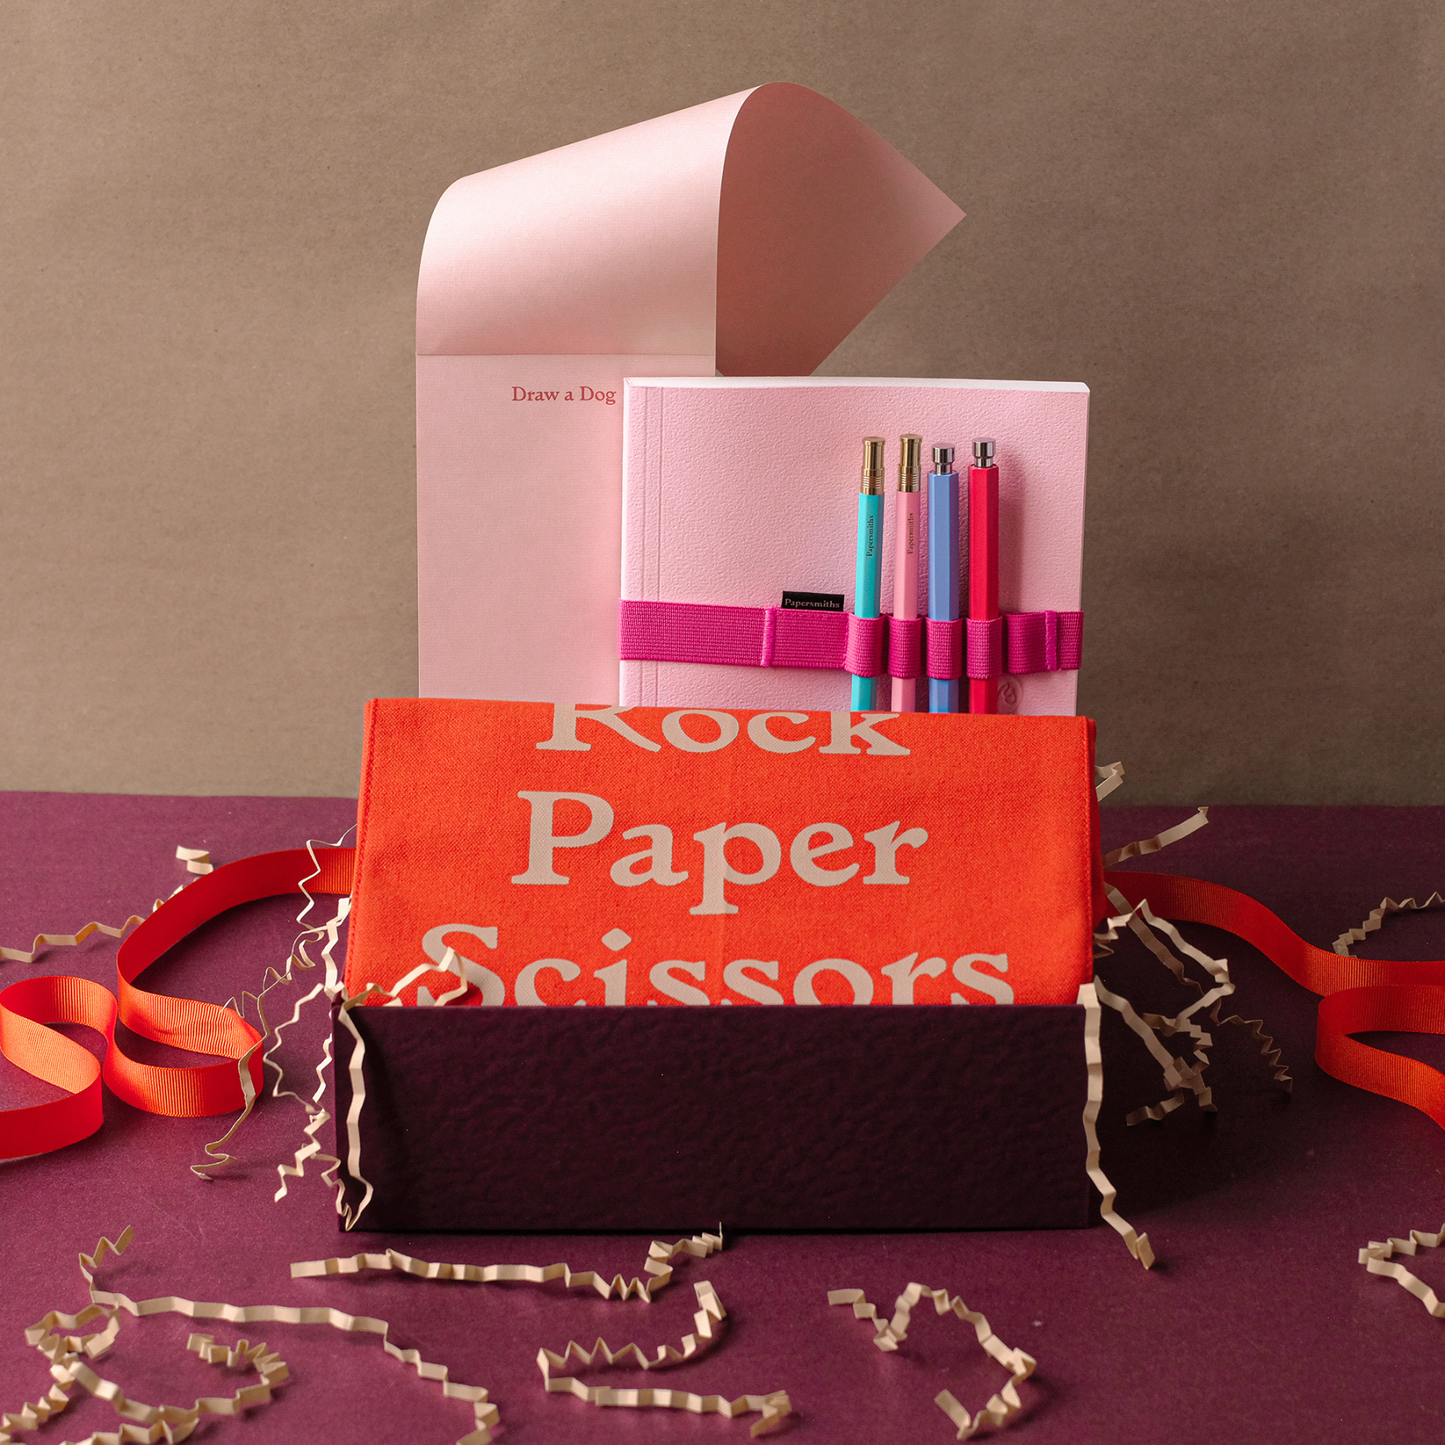 Ultimate Stationery Stash - Cowrie / Plain Paper